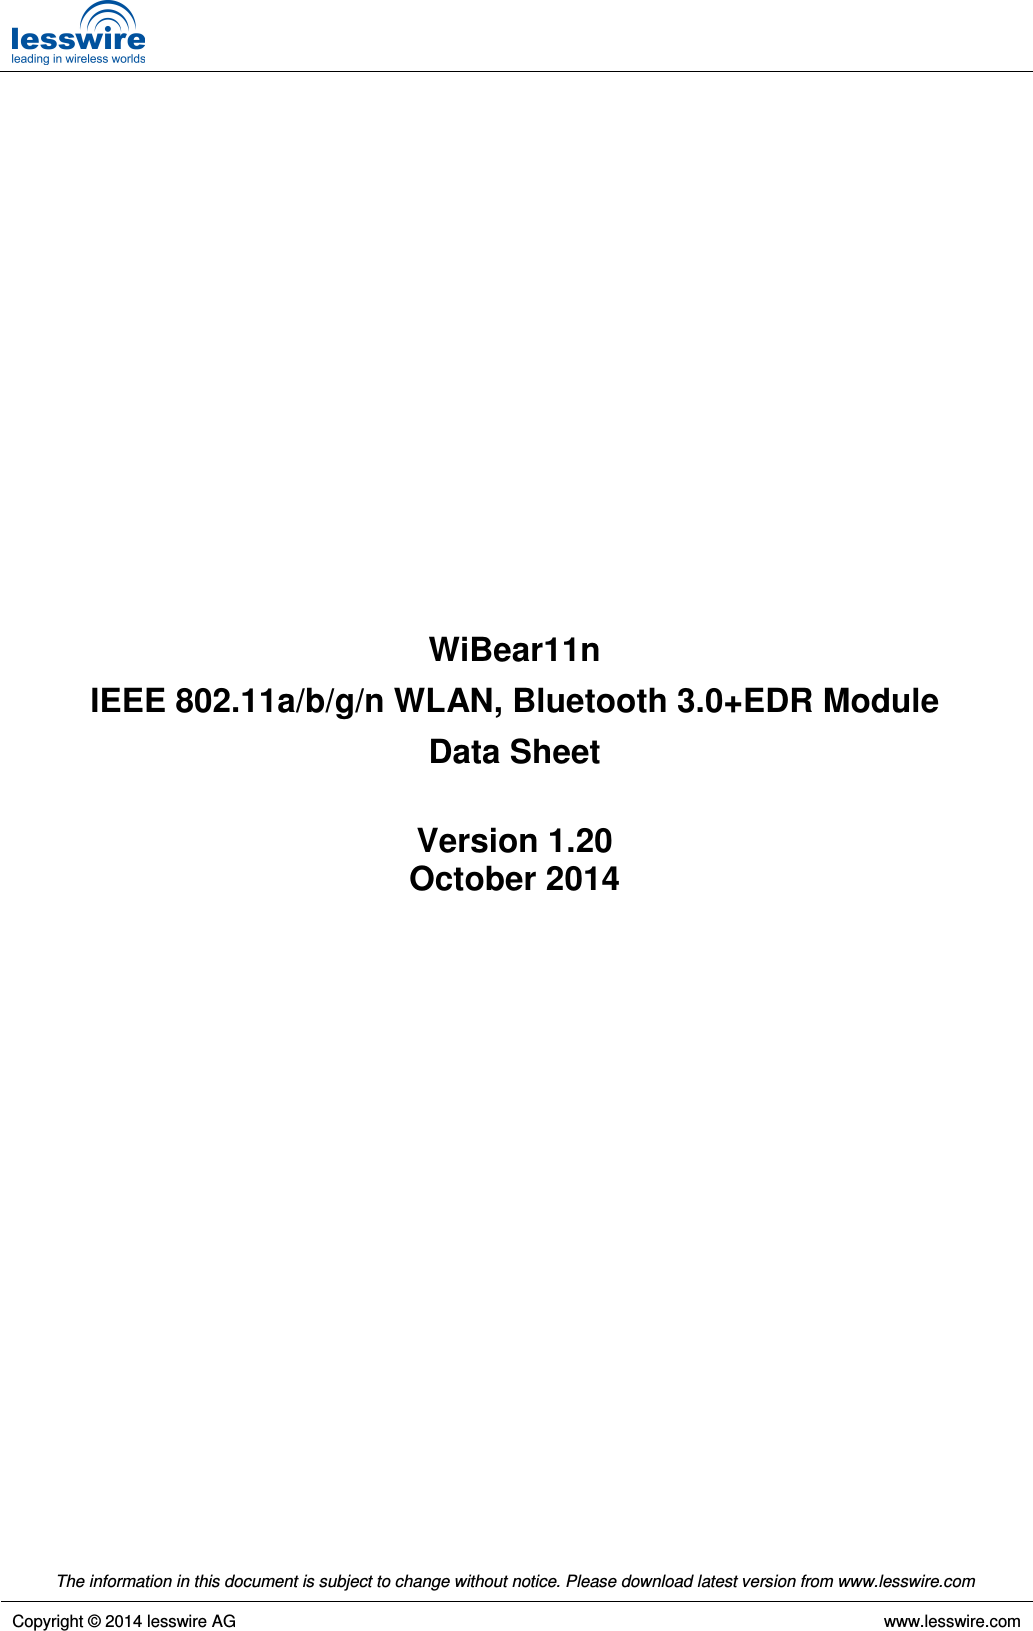   The information in this document is subject to change without notice. Please download latest version from www.lesswire.com   Copyright © 2014 lesswire AG     www.lesswire.com                    WiBear11n IEEE 802.11a/b/g/n WLAN, Bluetooth 3.0+EDR Module Data Sheet  Version 1.20 October 2014         